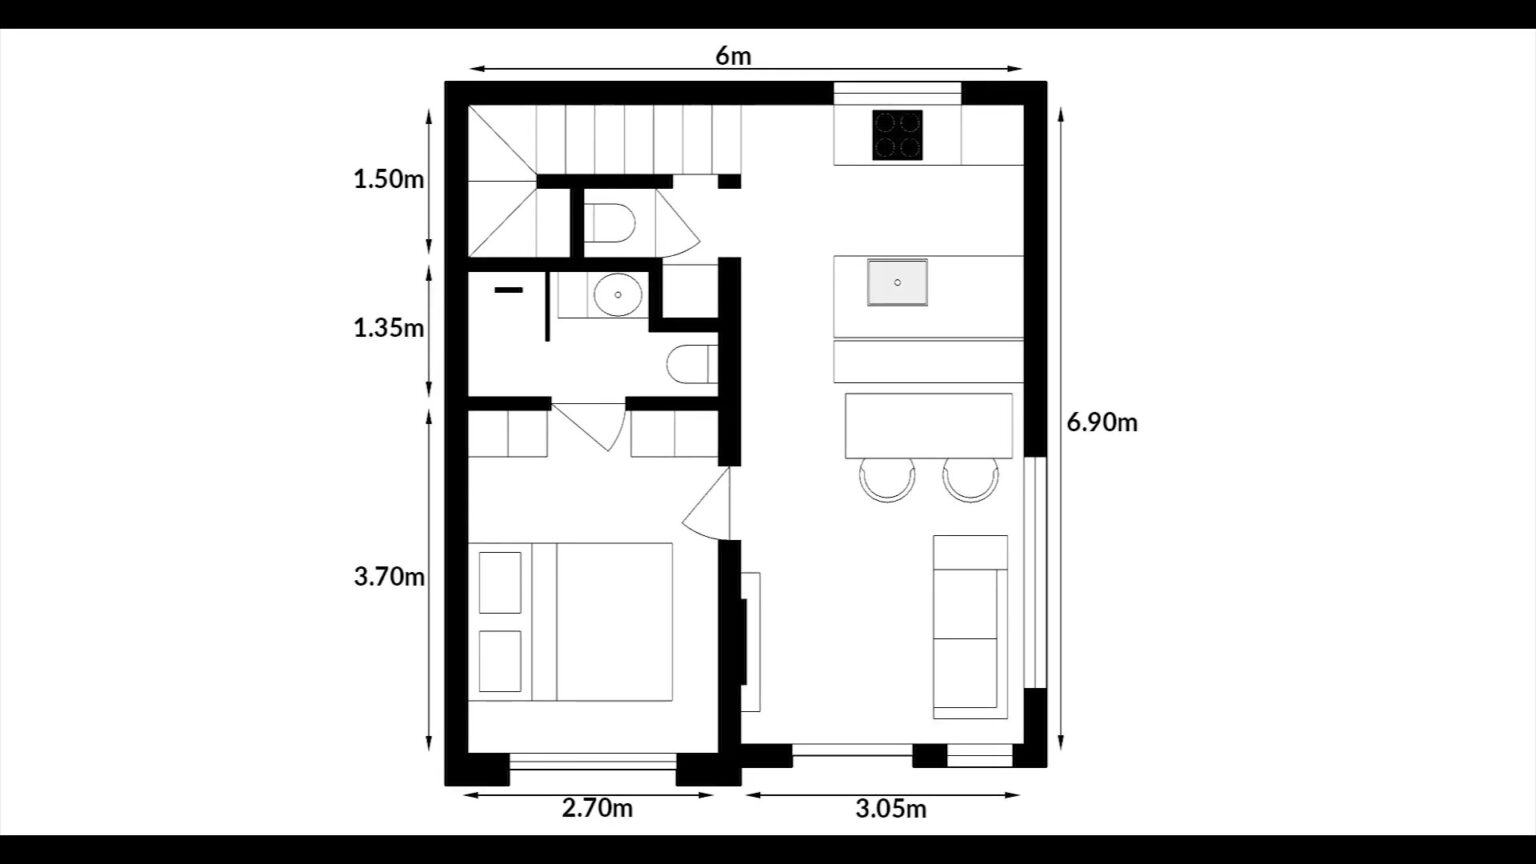 6x7 Meters Small House Design Idea with 3 Bedrooms - Simple Design House